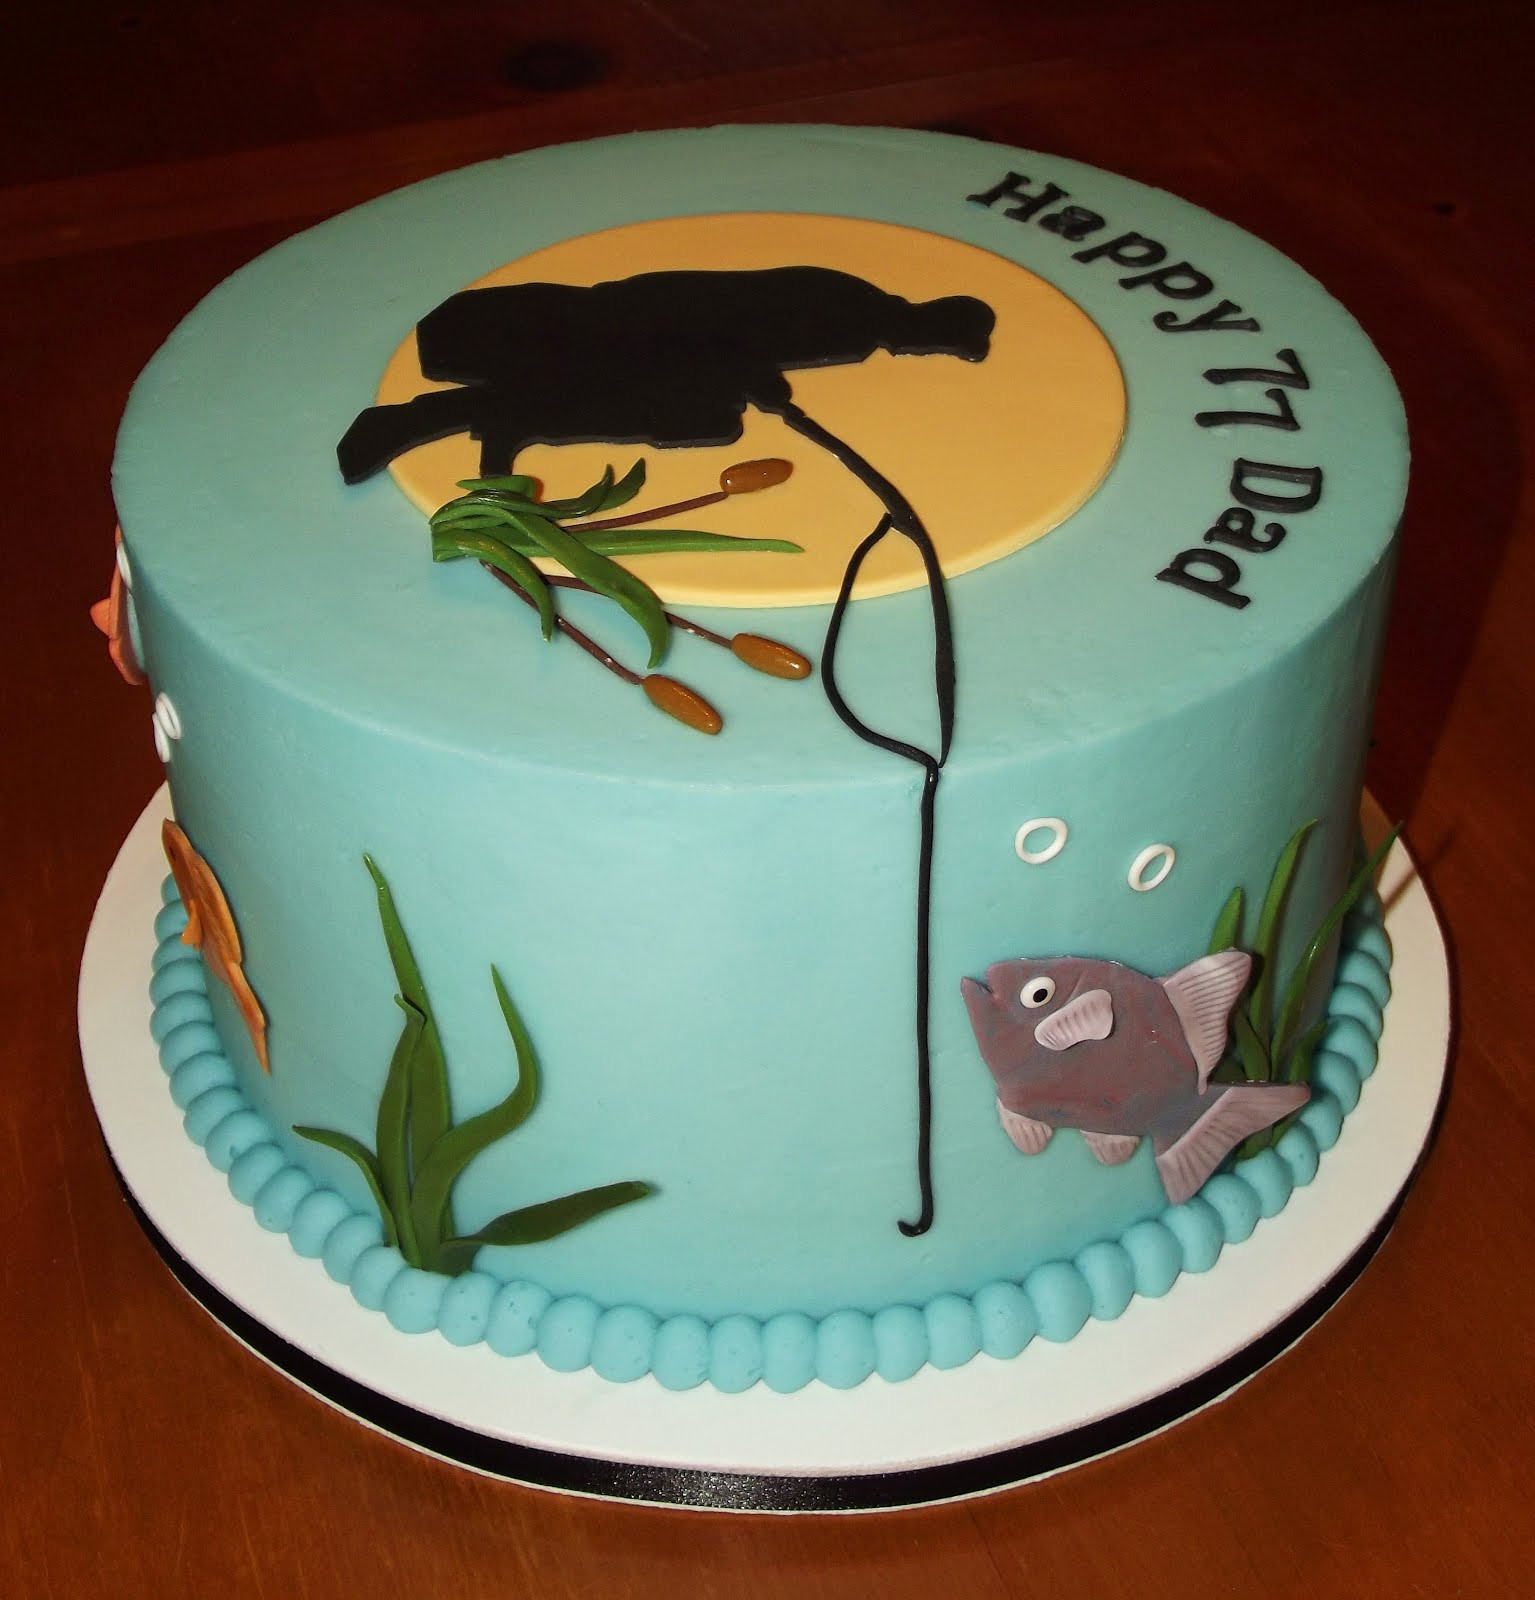 The top 15 Ideas About Fishing Birthday Cake